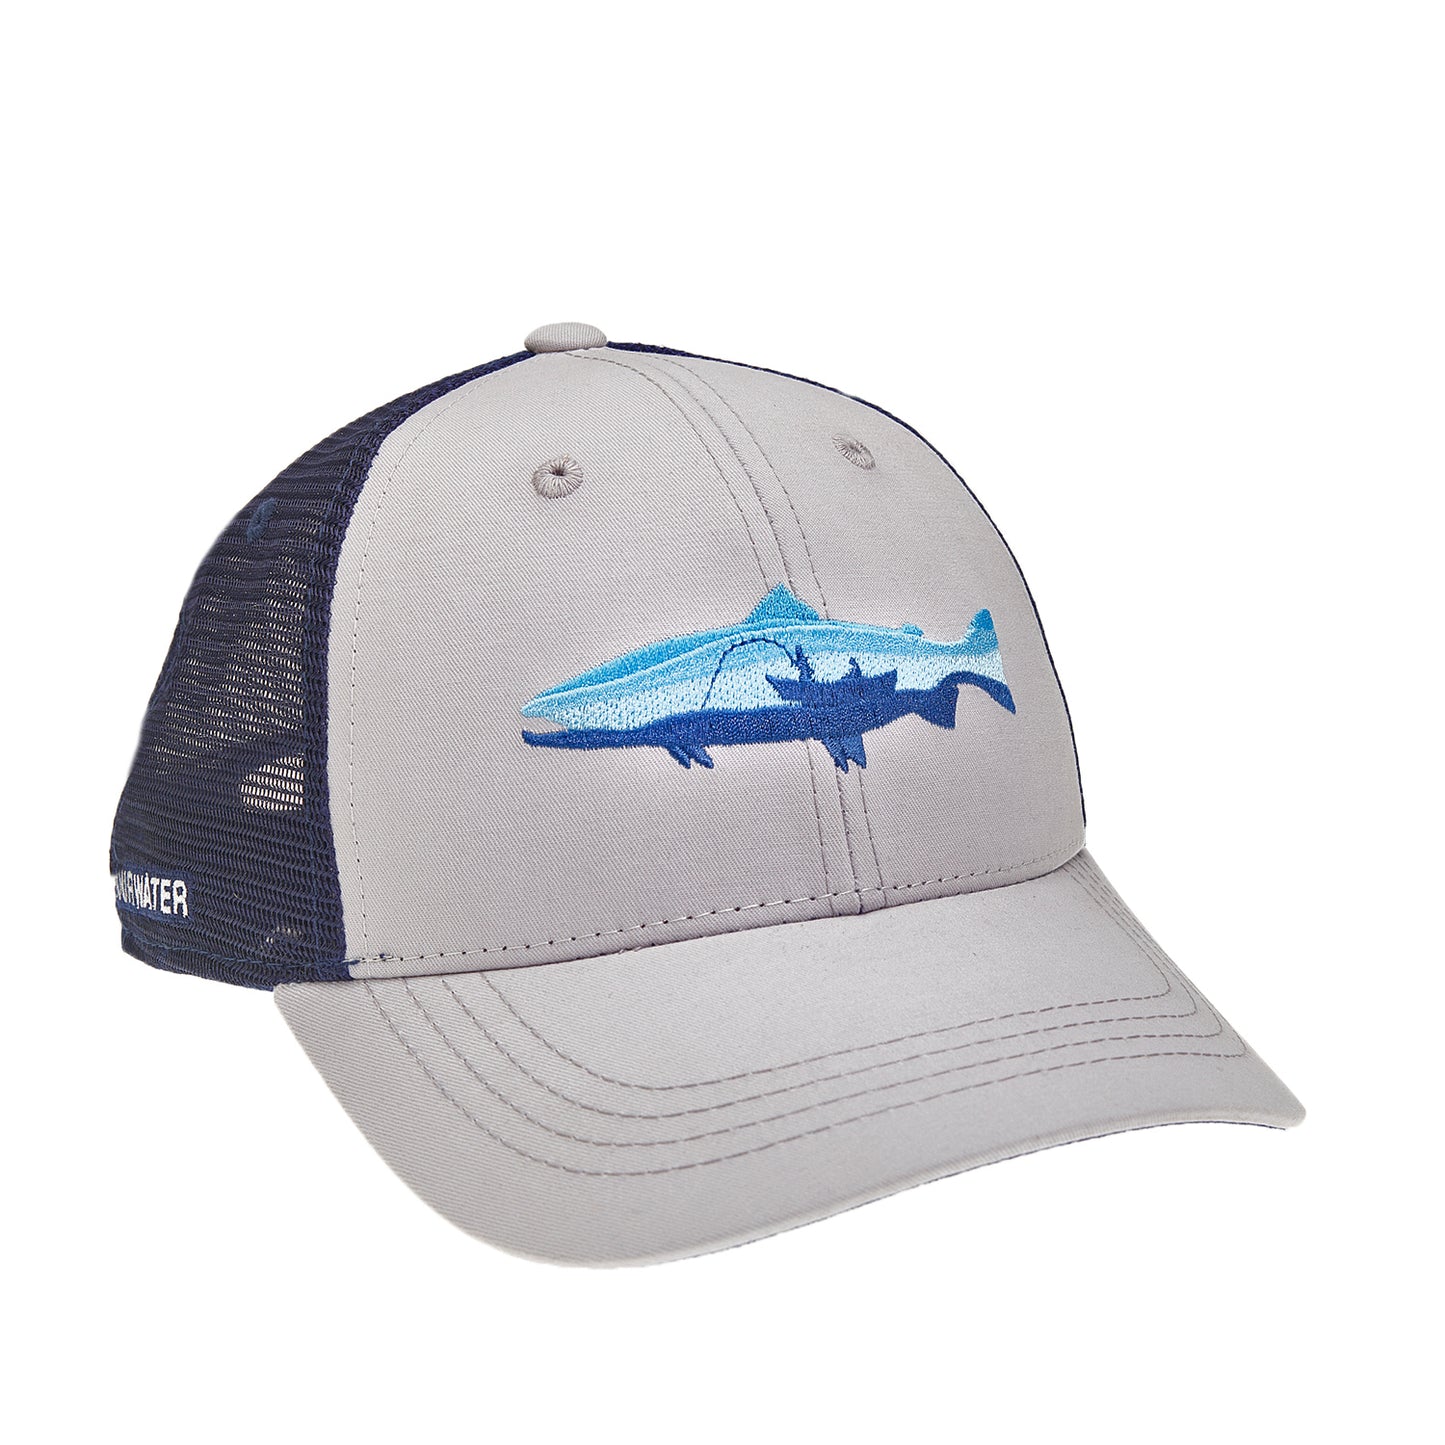 A hat with blue mesh and gray fabric on front has embroidery of a trout with a drift boat and angler inside